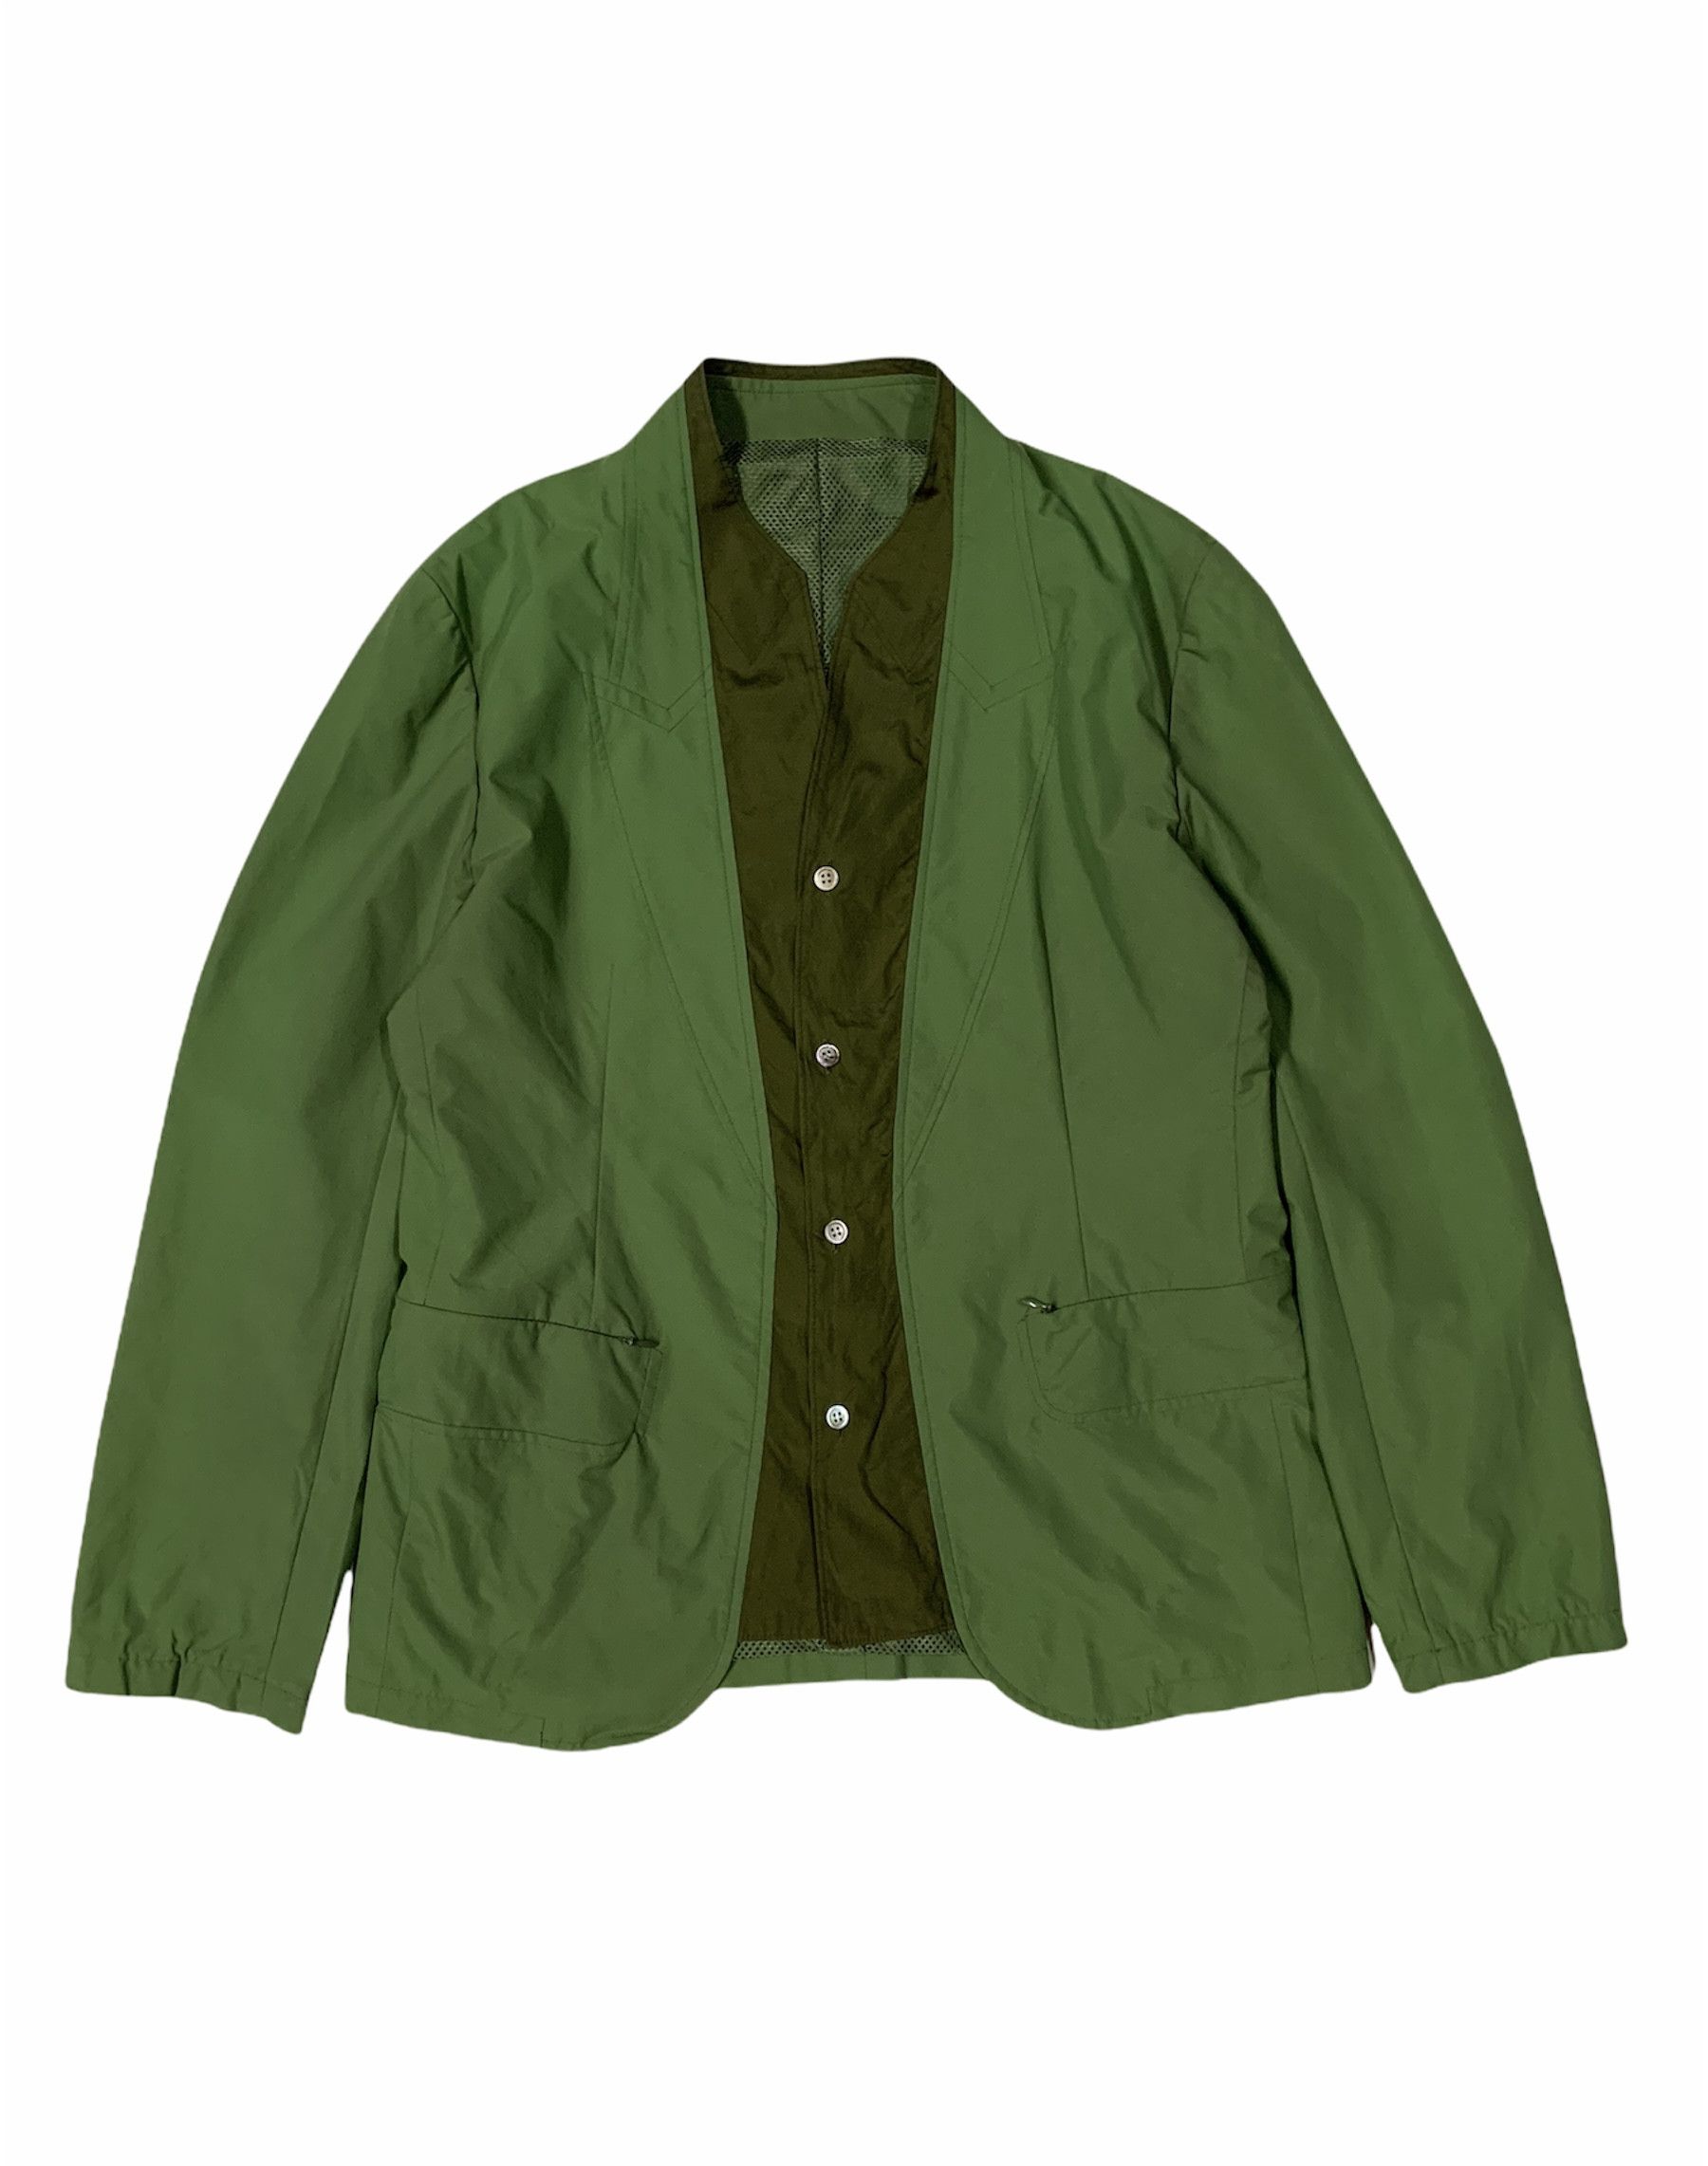 🔥UNDERCOVER CHOATIC DISCHORD JACKETS OLIVE GREEN - 8